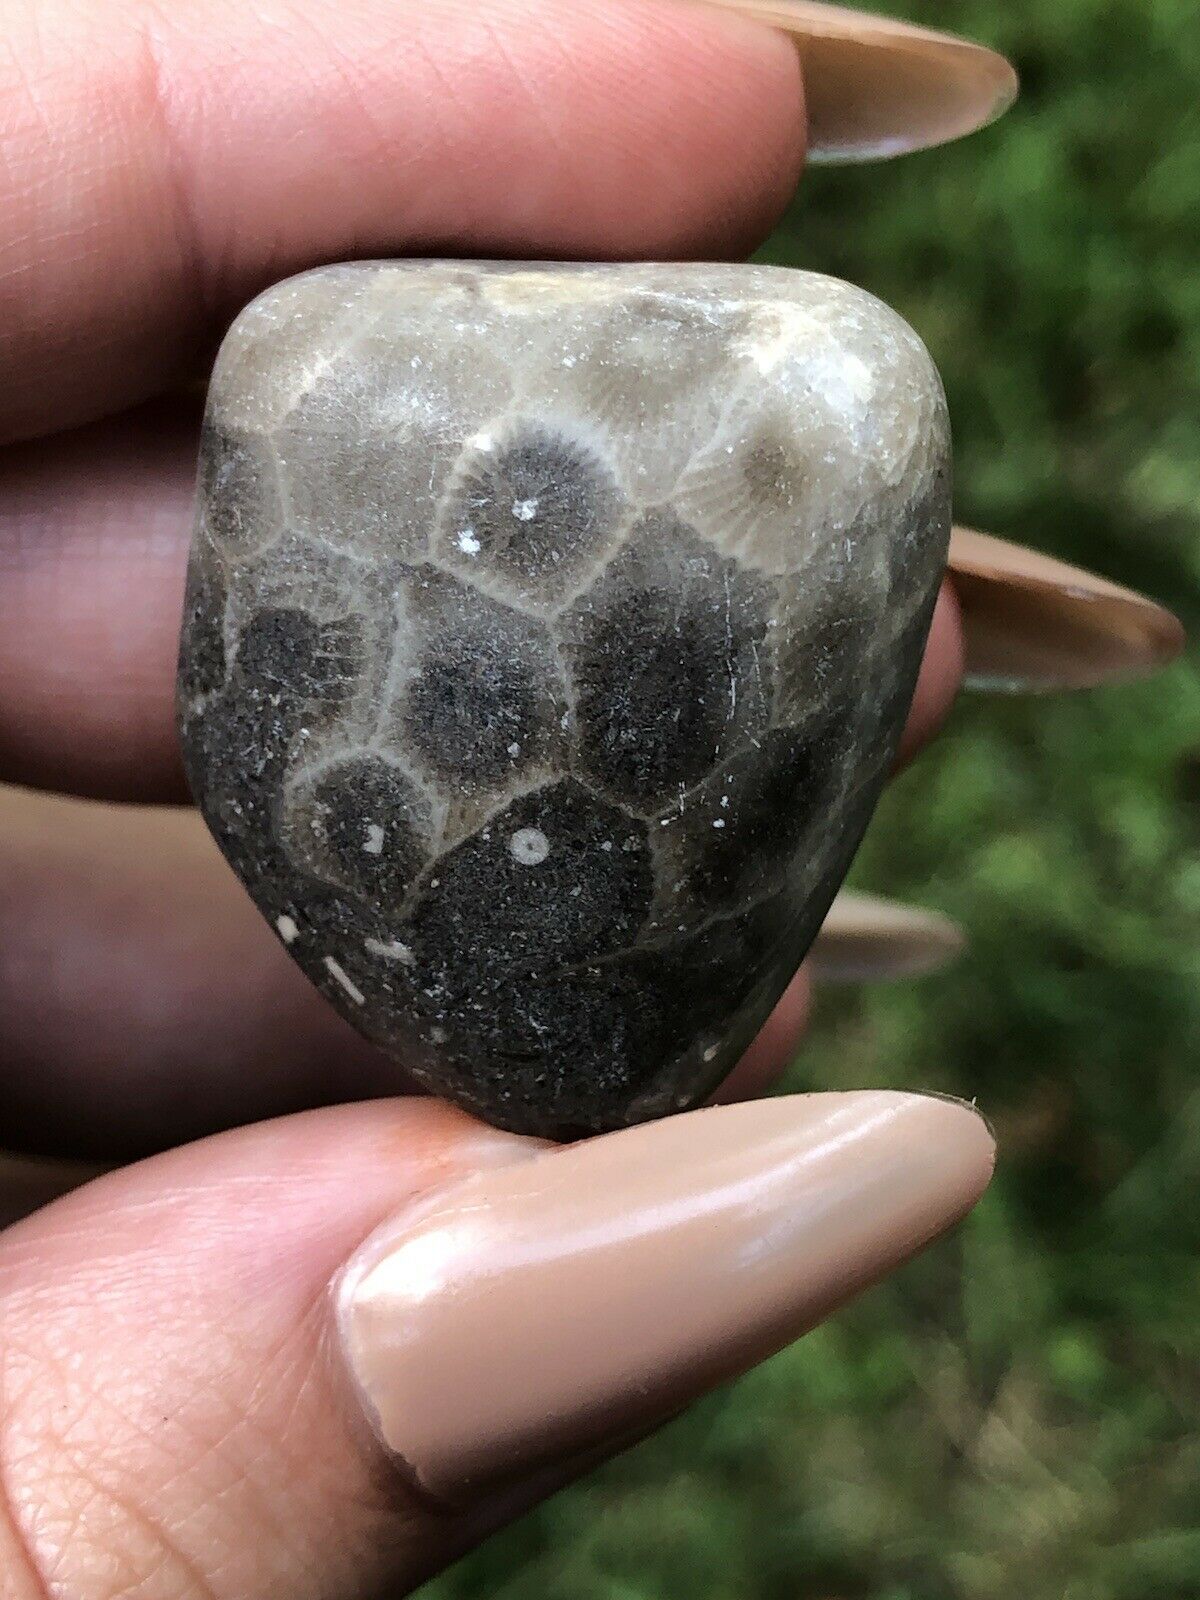 Petoskey Stone- Natural 1.3 Inch Ocean Tumbled Fossilized Coral Specimen